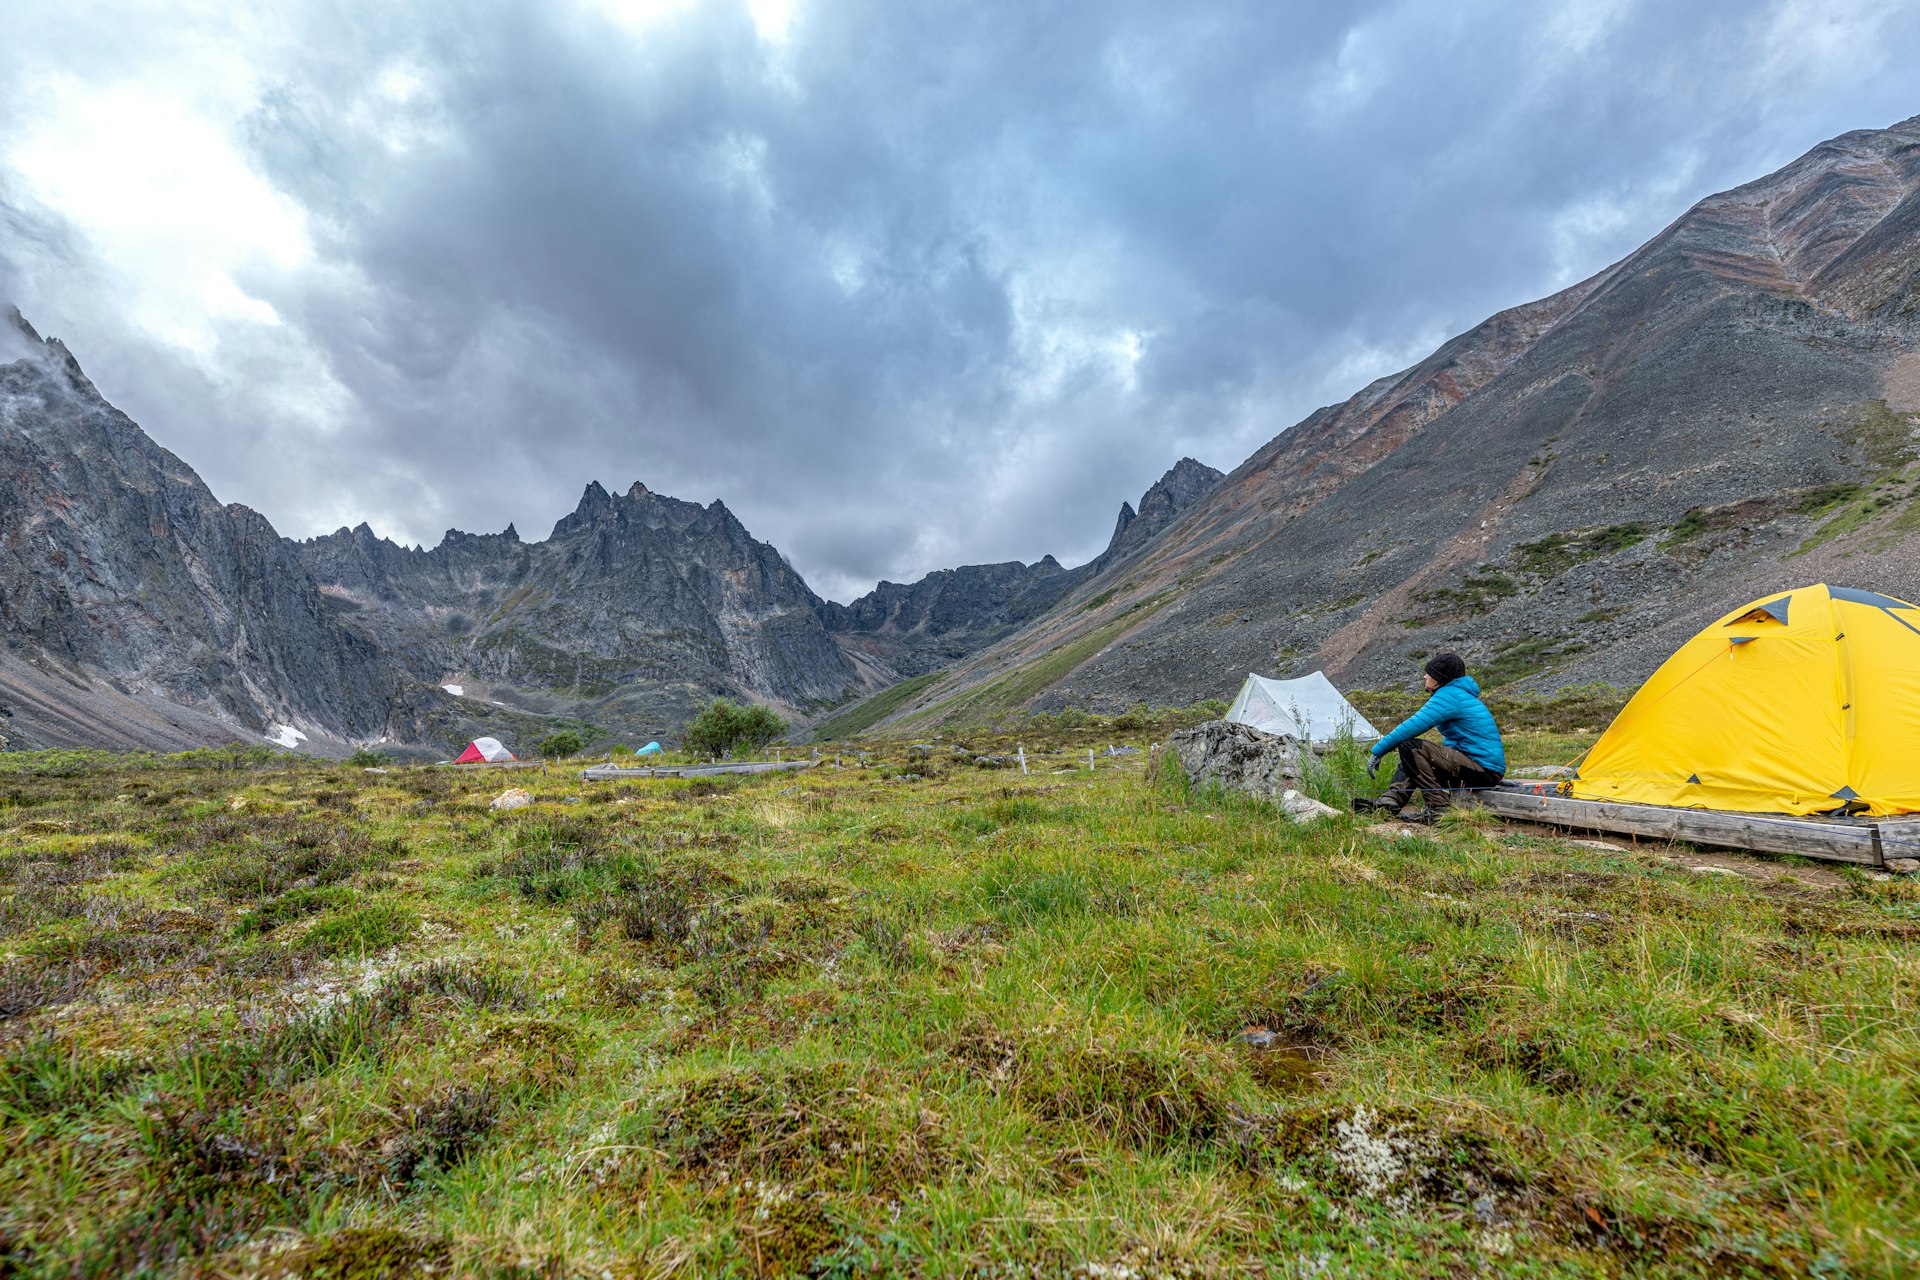 A hiker pauses at a campground near Grizzly Lake, Canada